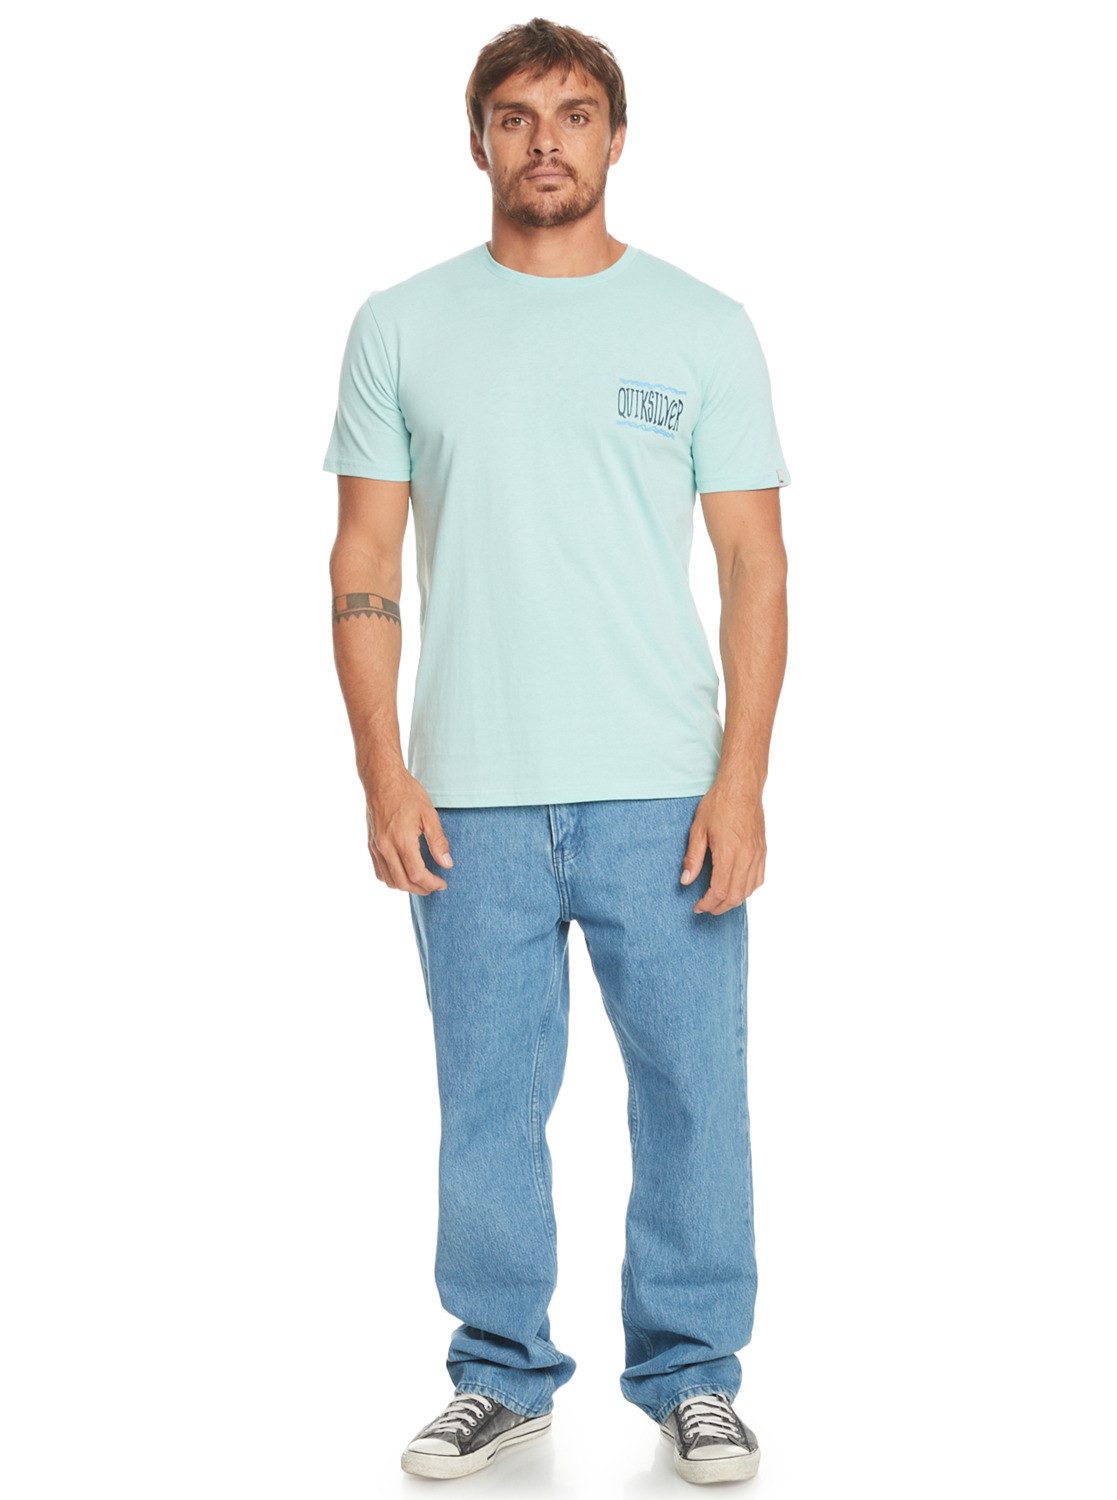 Quiksilver T-Shirt Taking Roots Pastel Turquoise